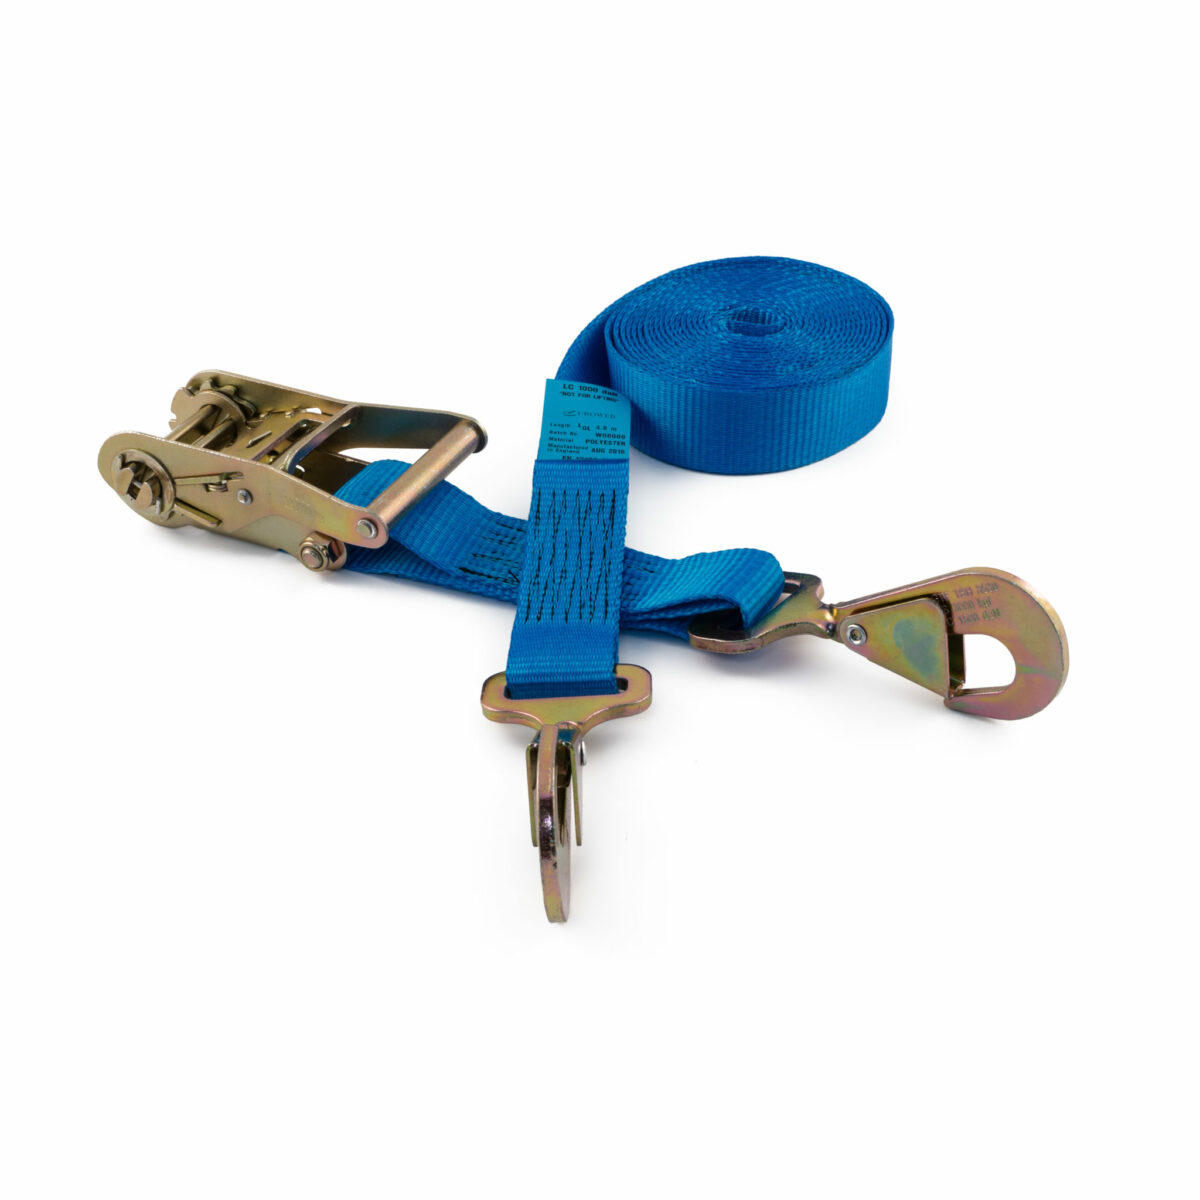 35mm Ratchet Straps with Twisted Snap Hooks rated to 2000Kg